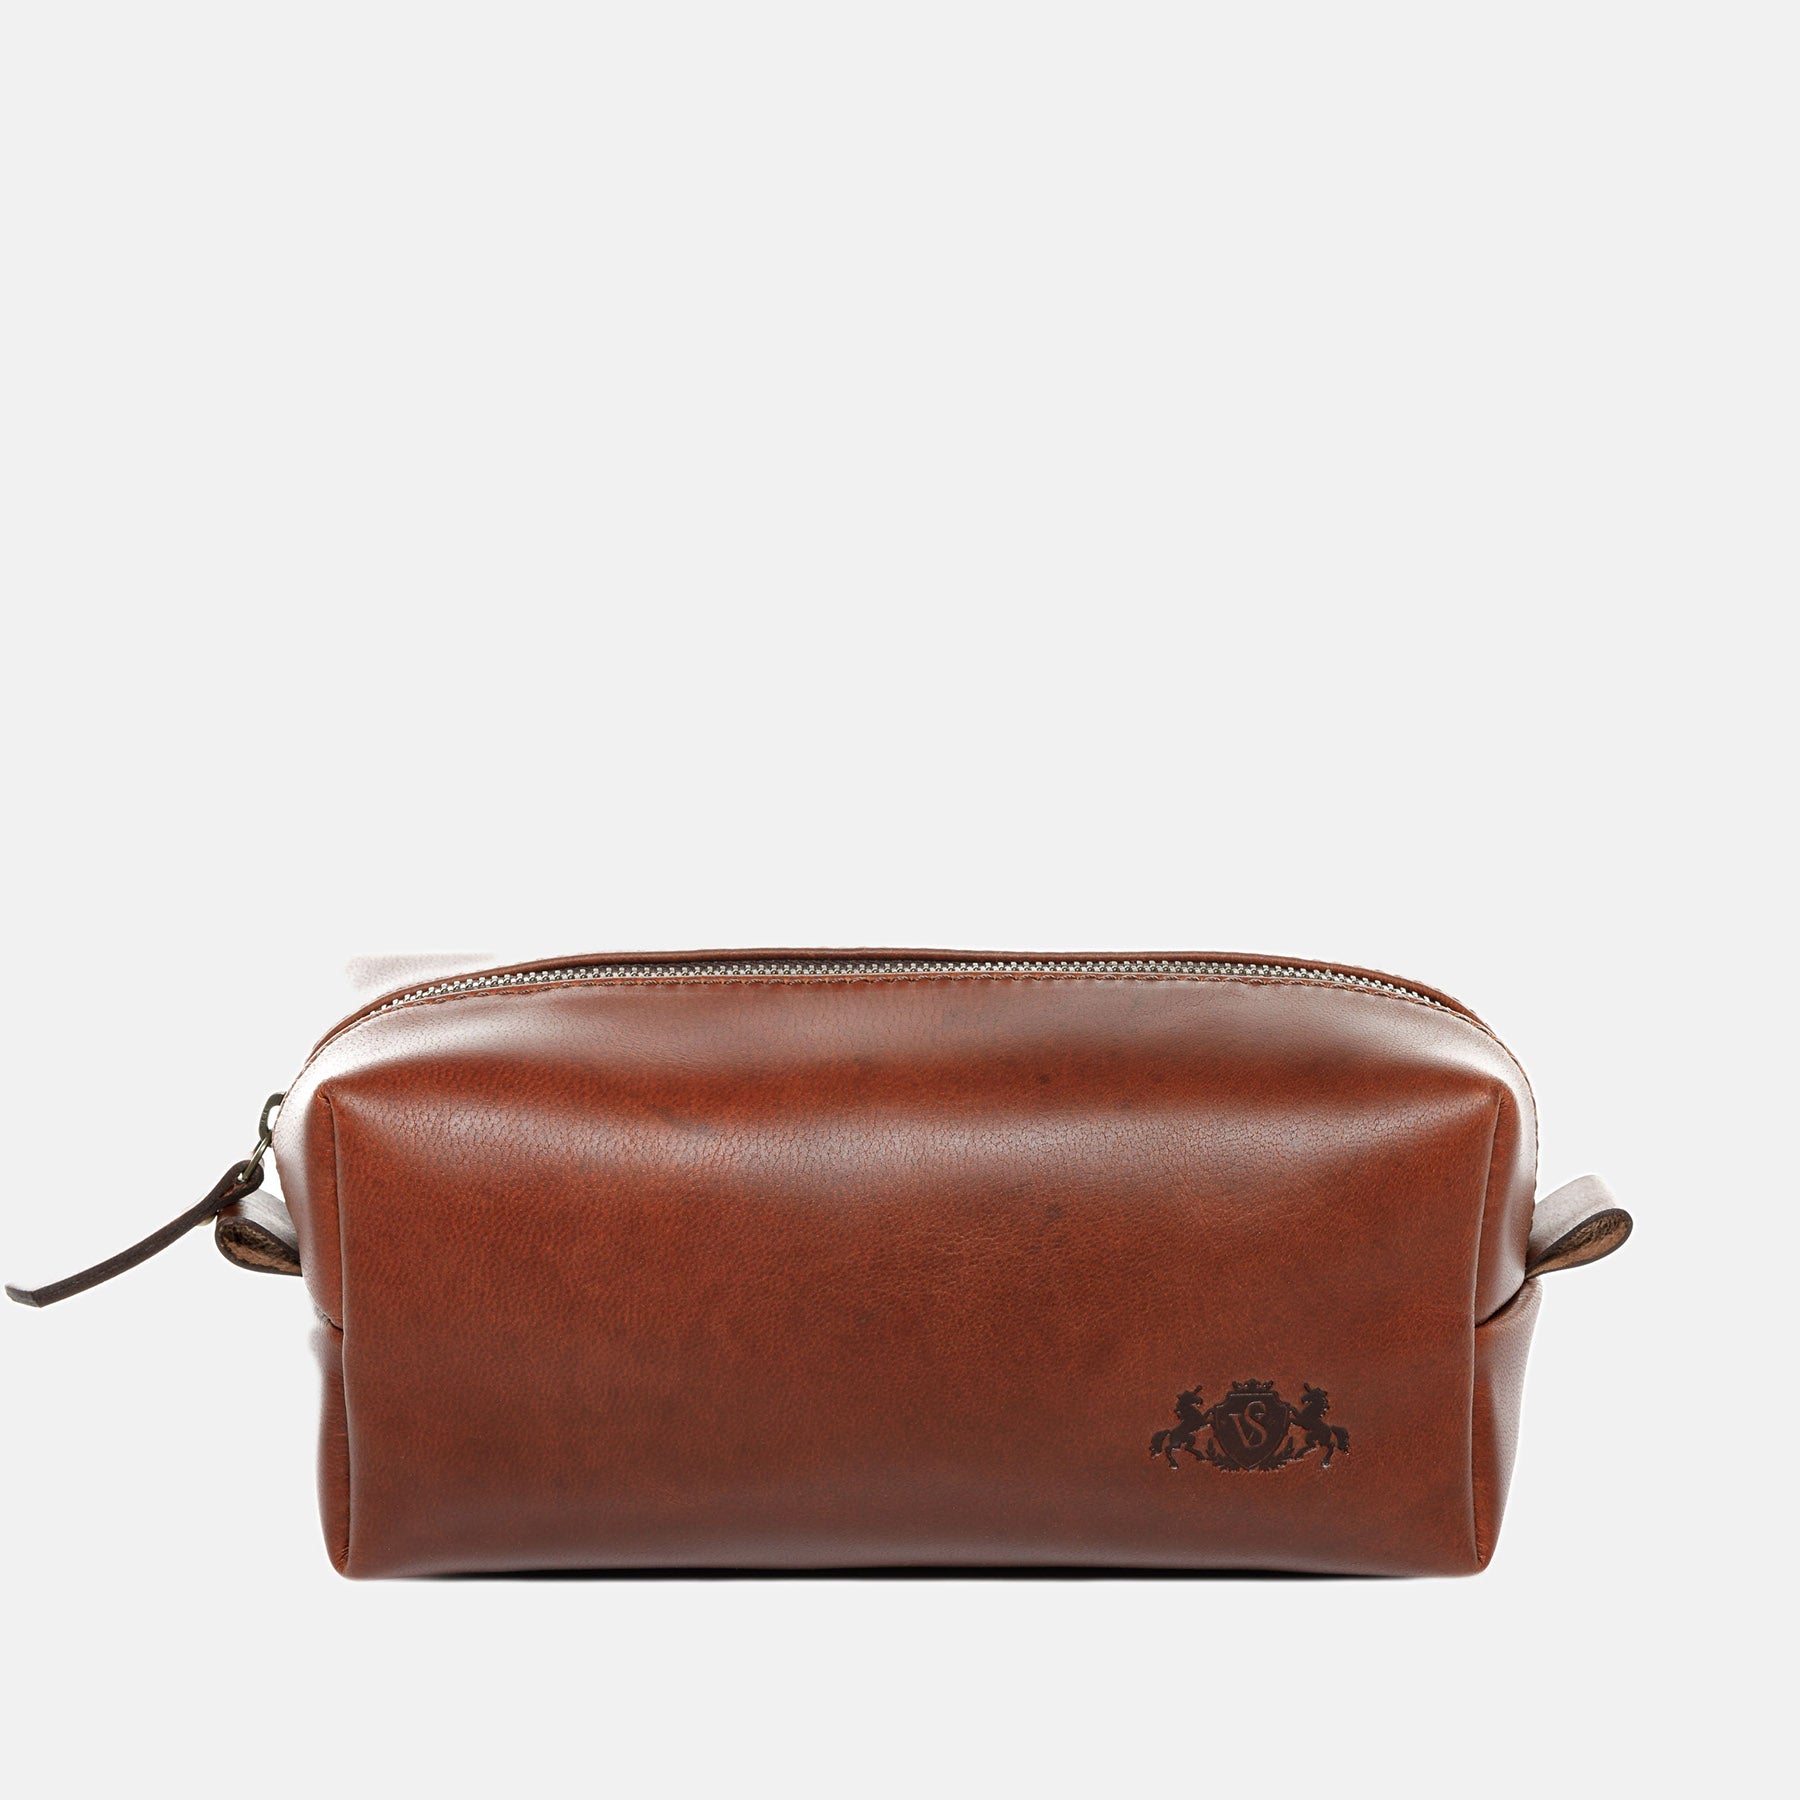 Toilet bag JAY smooth leather light brown